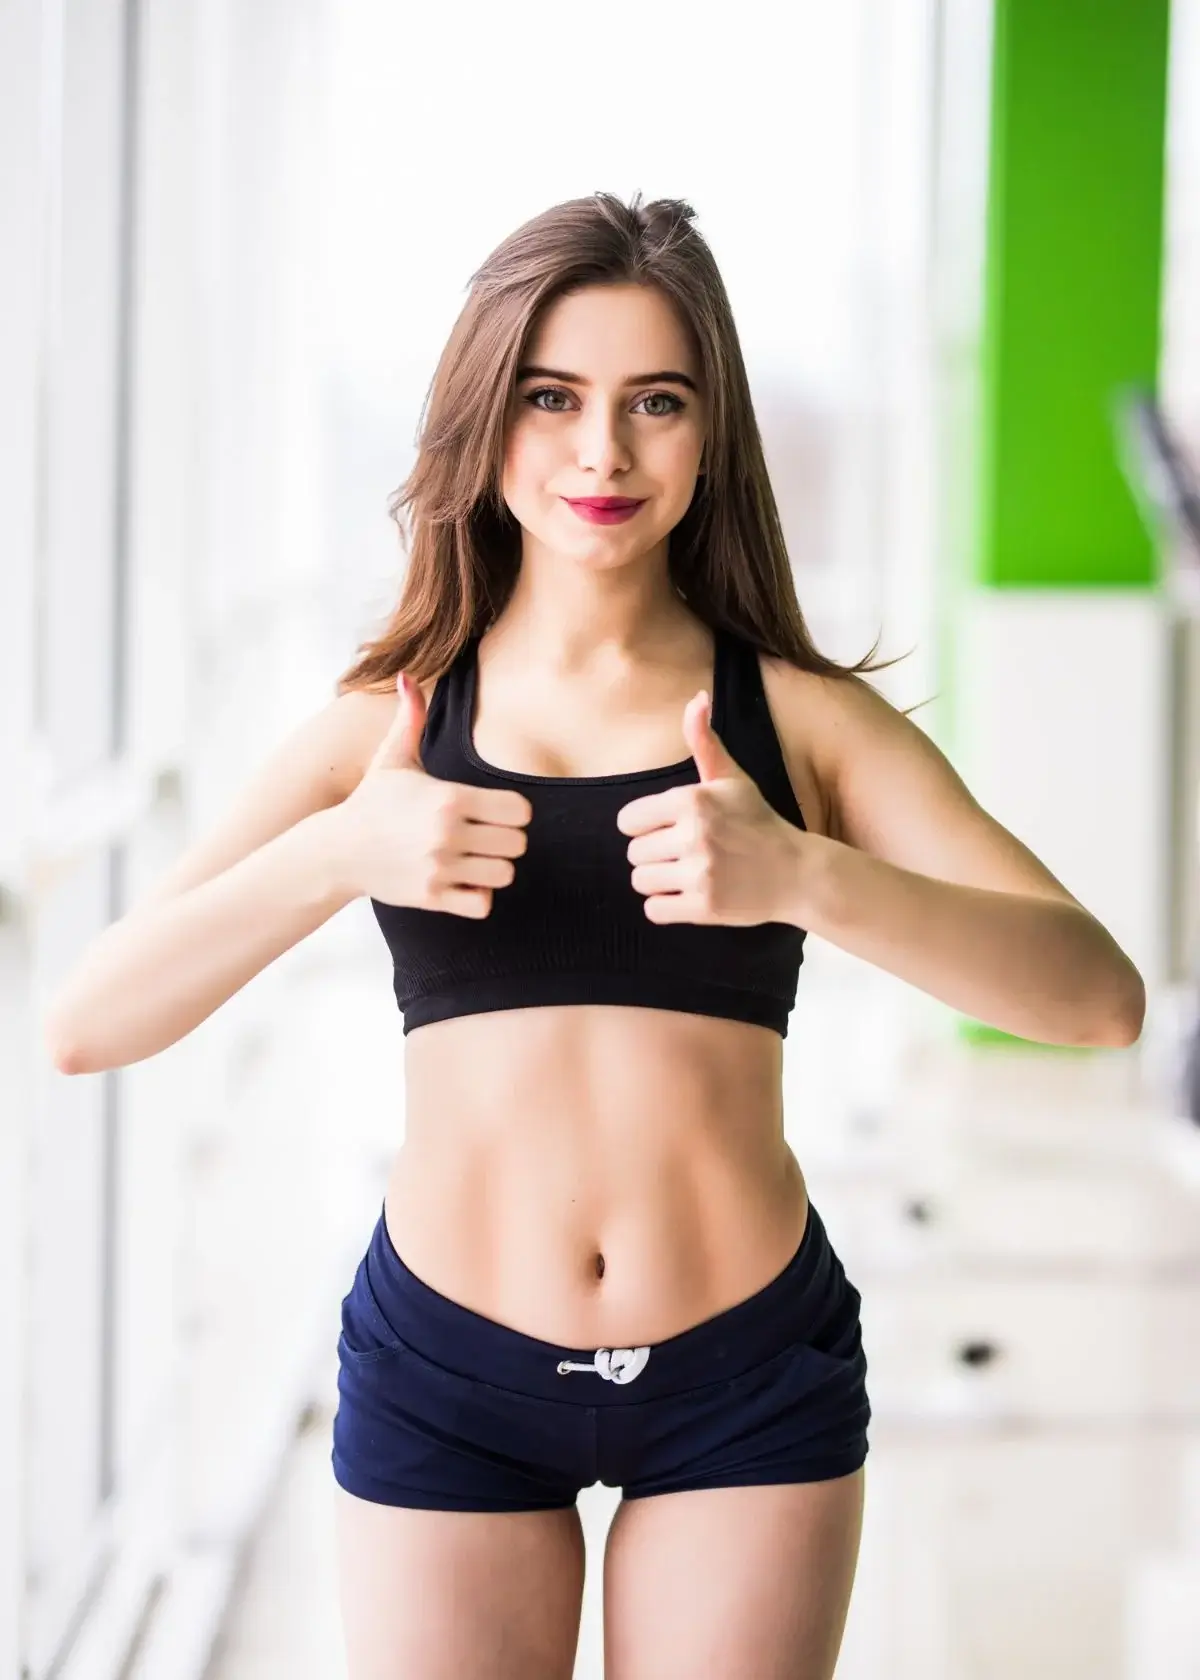 How to choose the best sports bra?